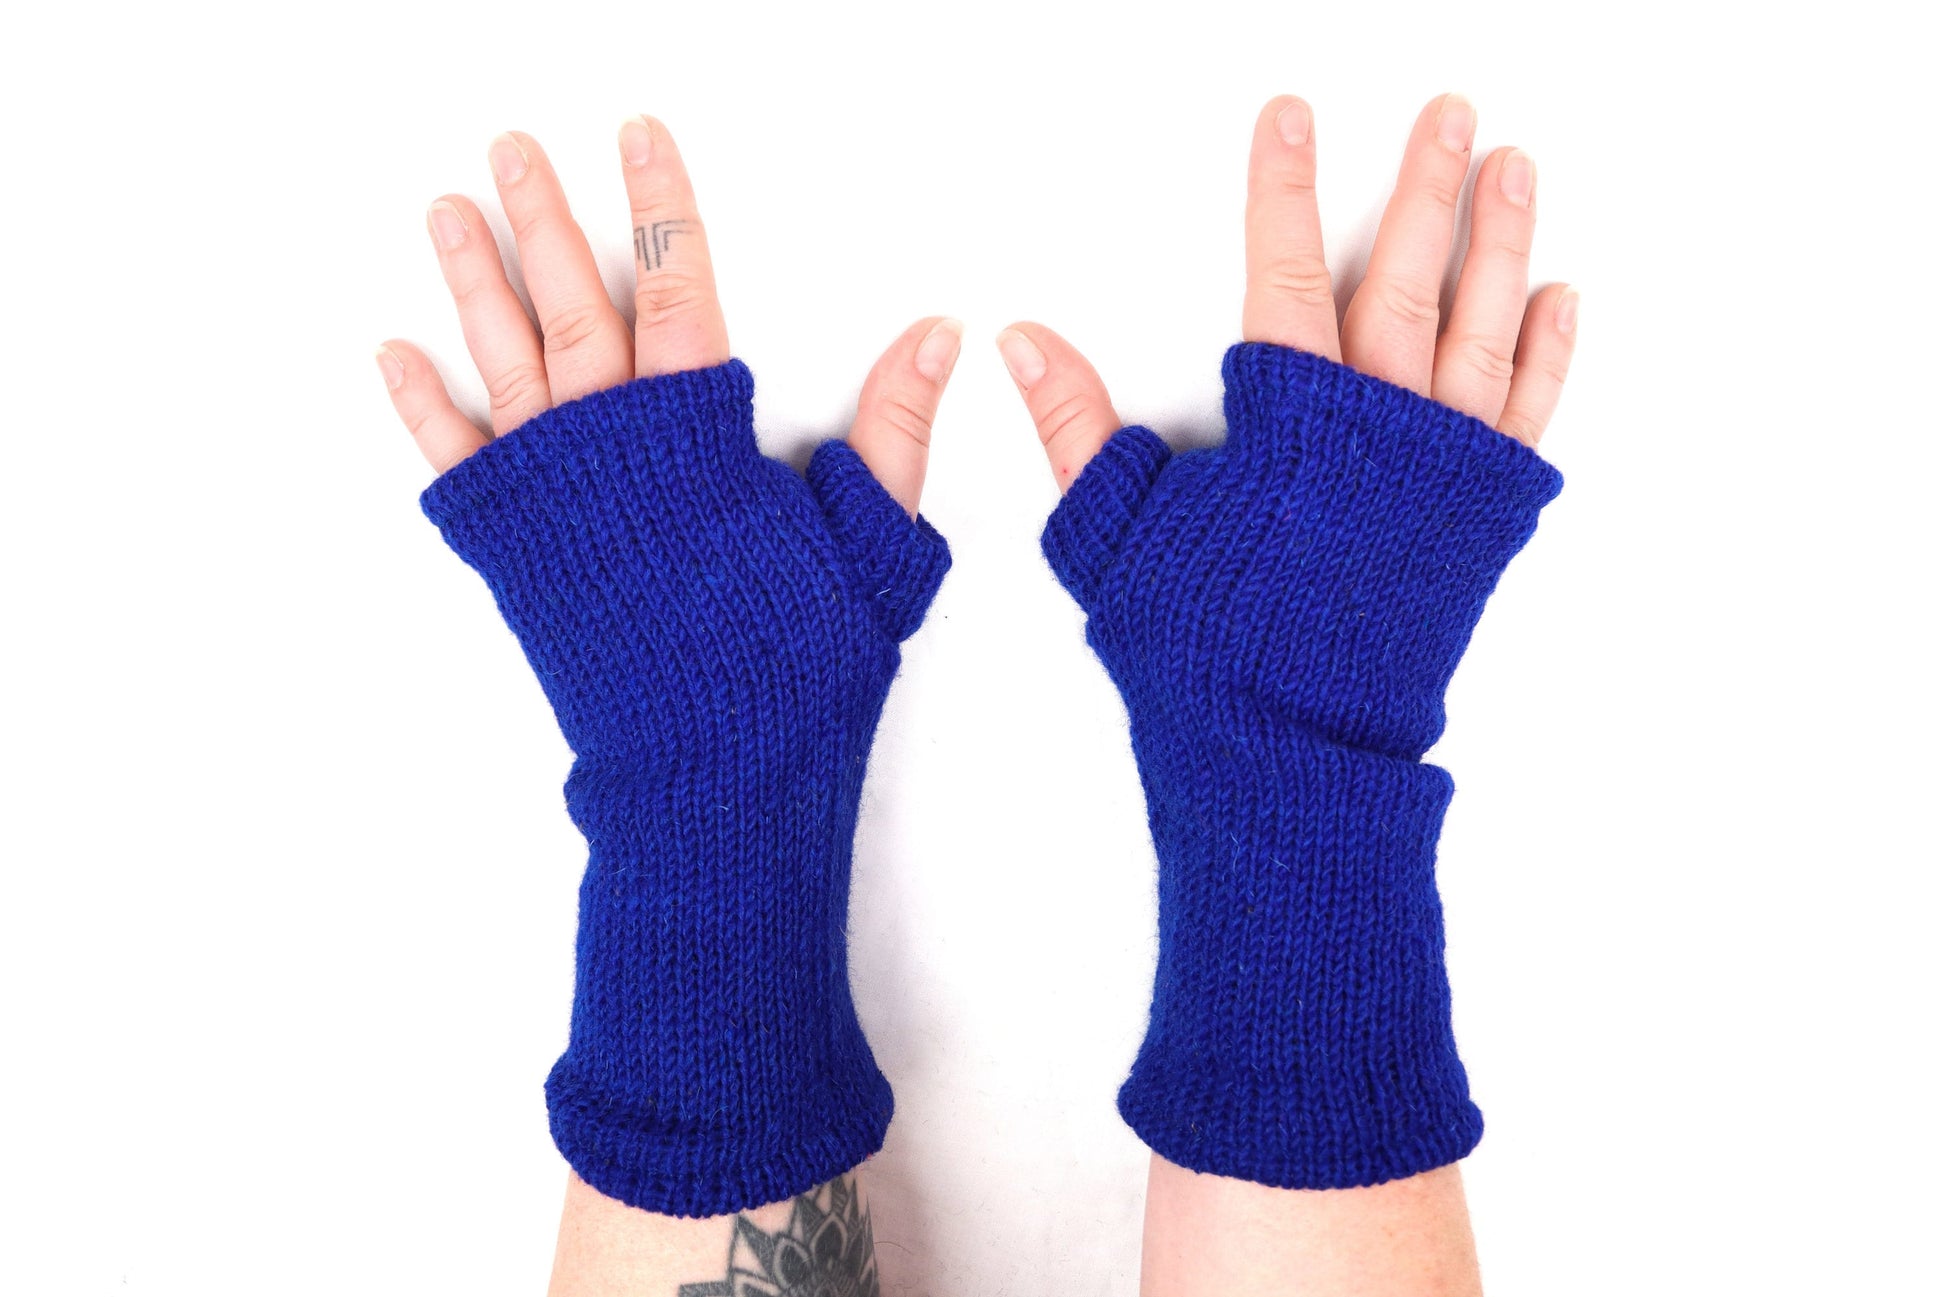 Fleece Lined Knitted Wrist Warmers - Blue - Bare Canvas